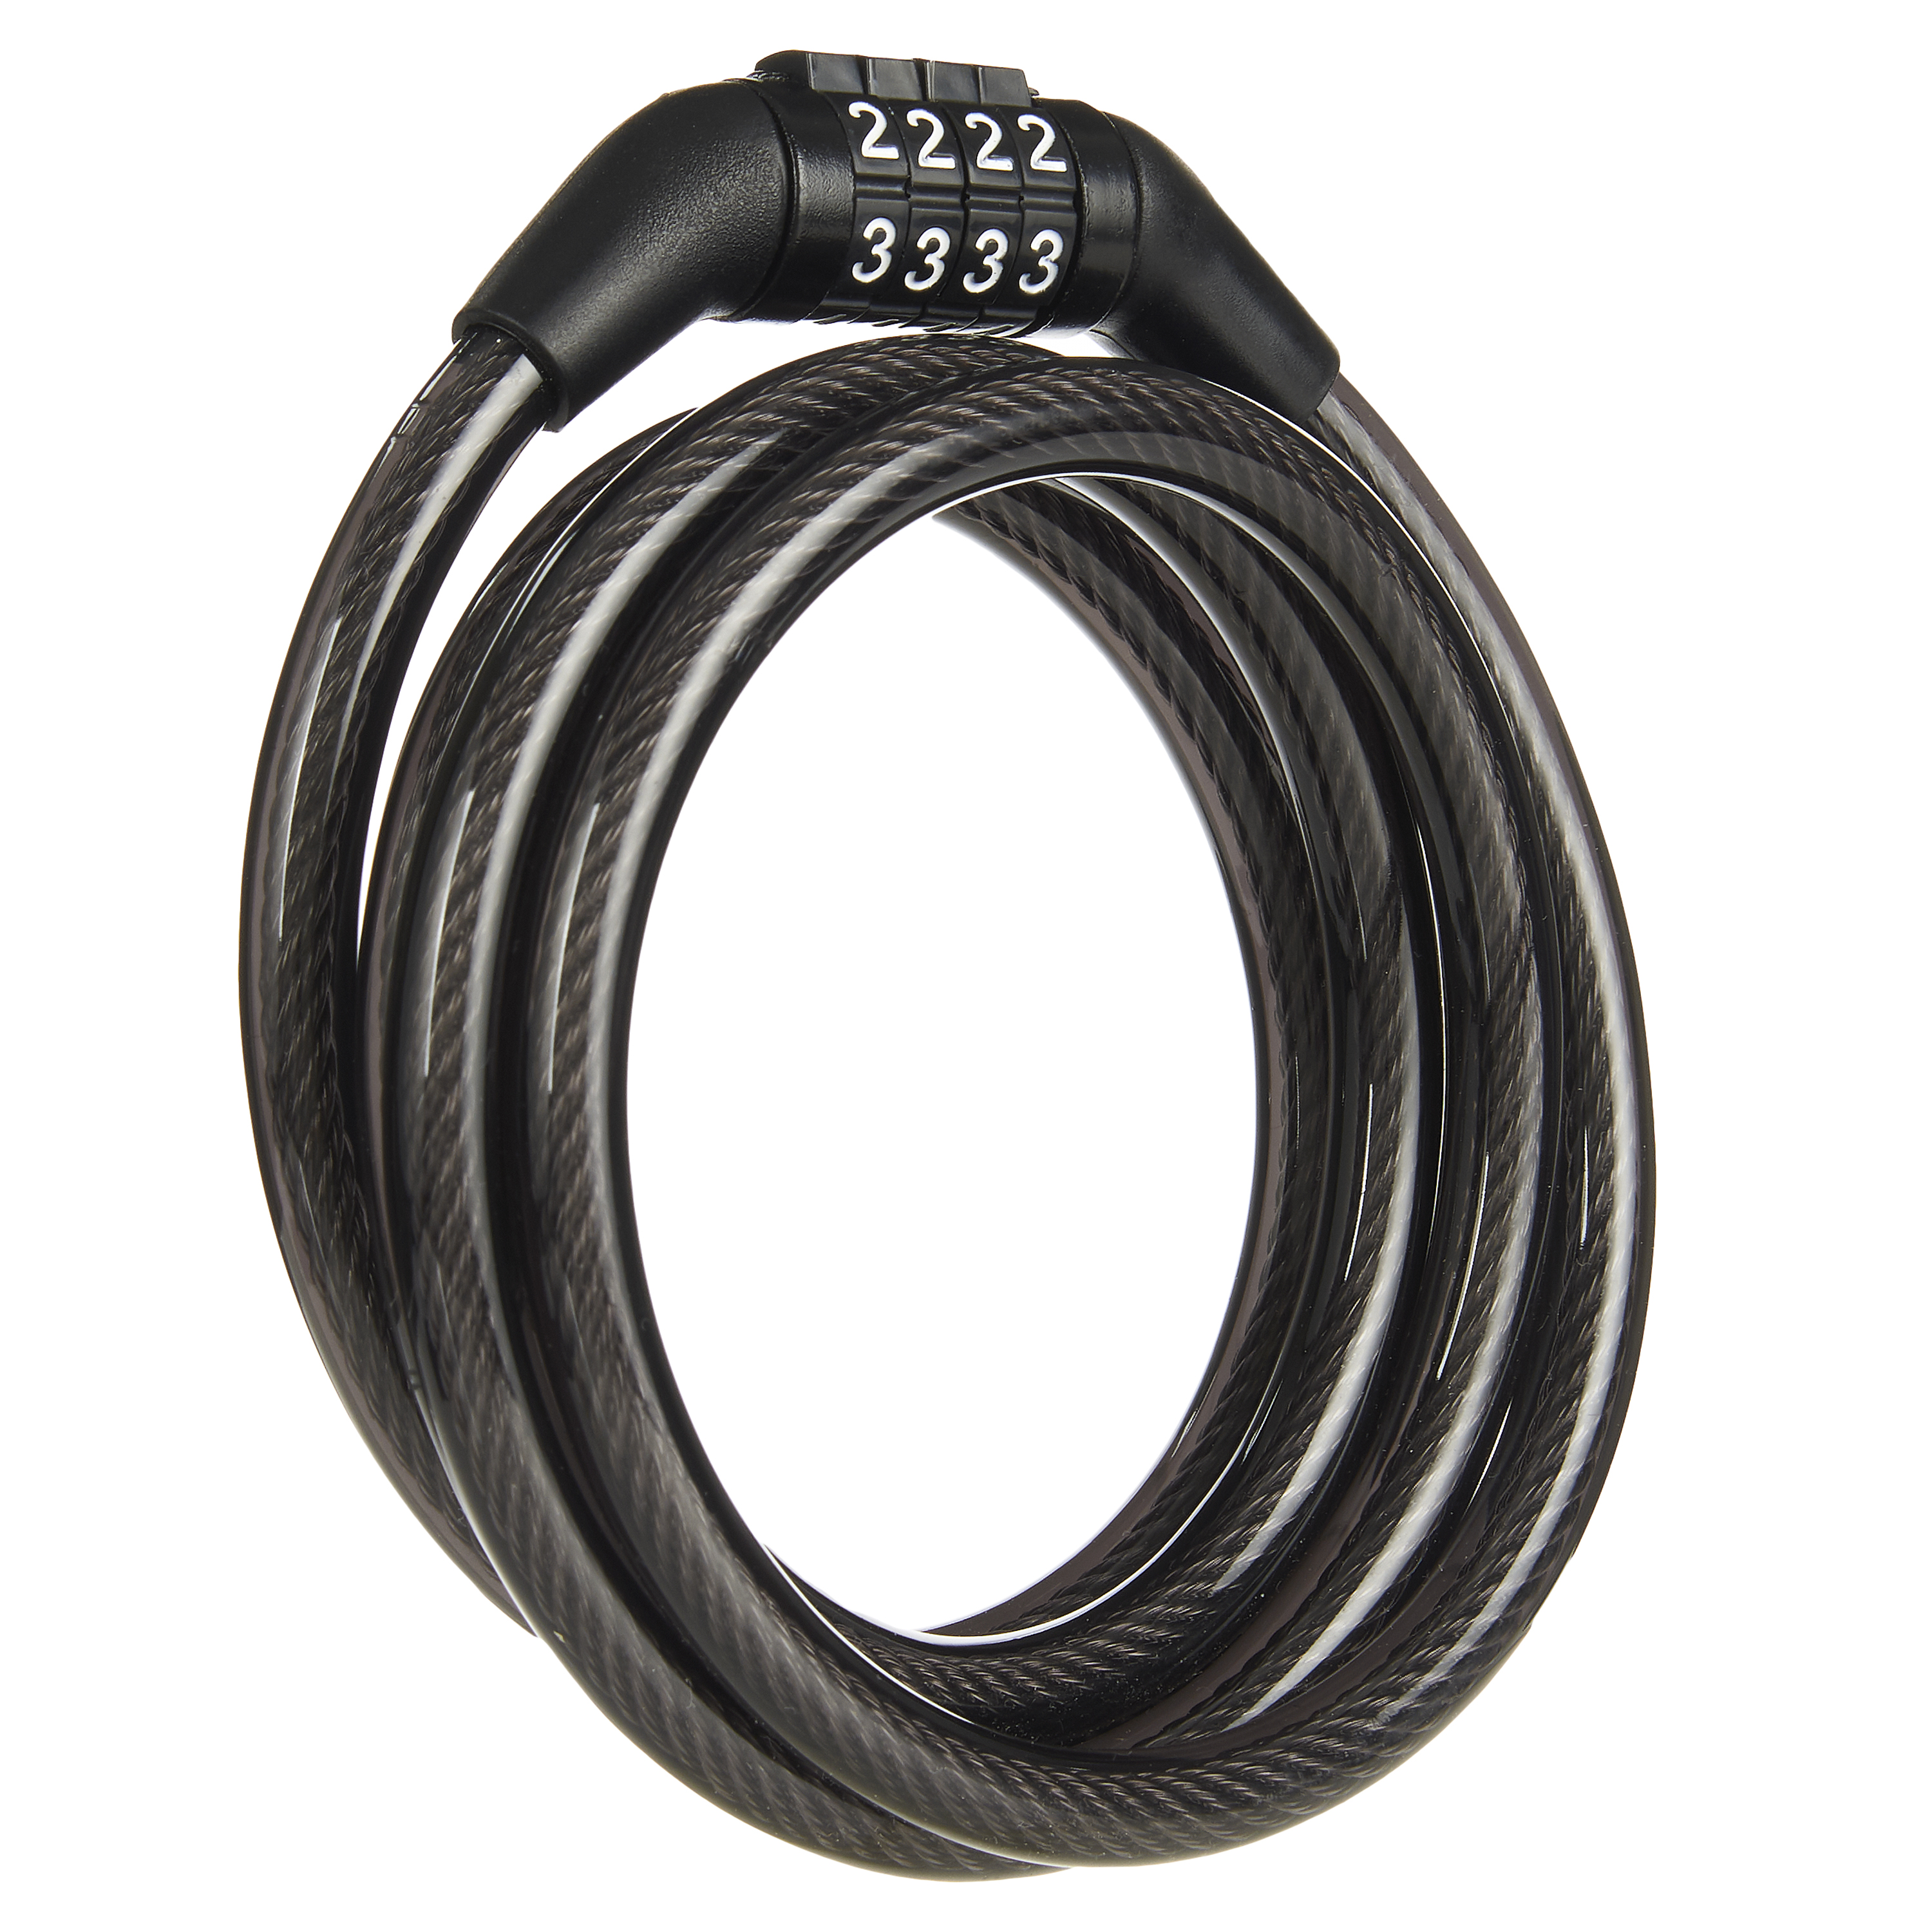 Flexible Steel Combination Cable Lock for Cycling